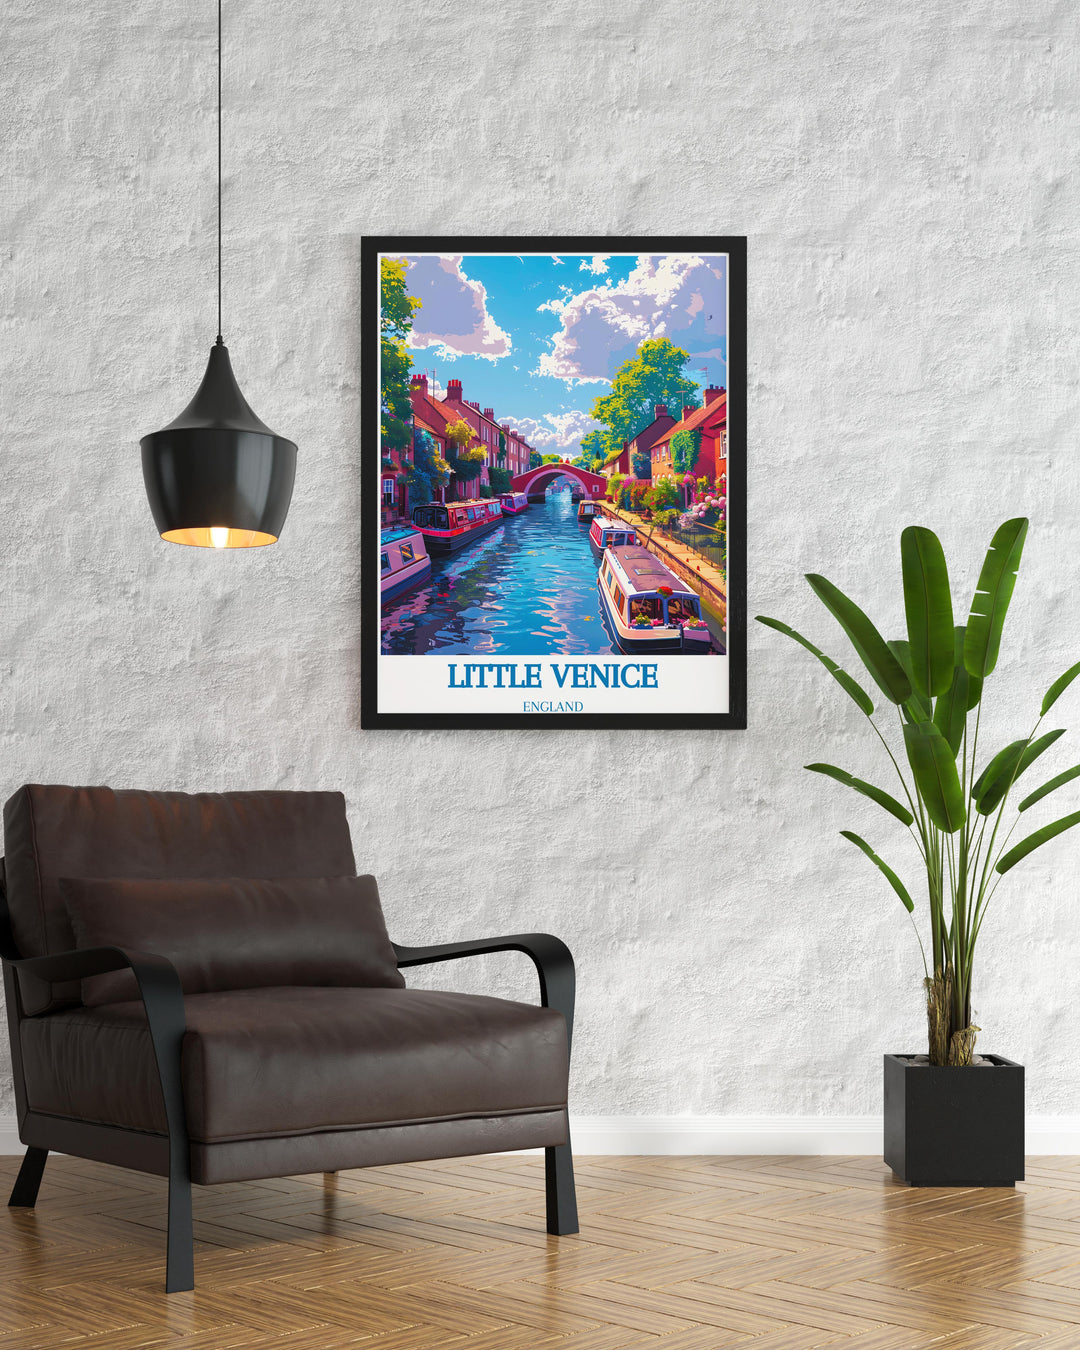 Vibrant summer scene of Regents Canal, perfect for those looking to add a seasonal touch to their decor.